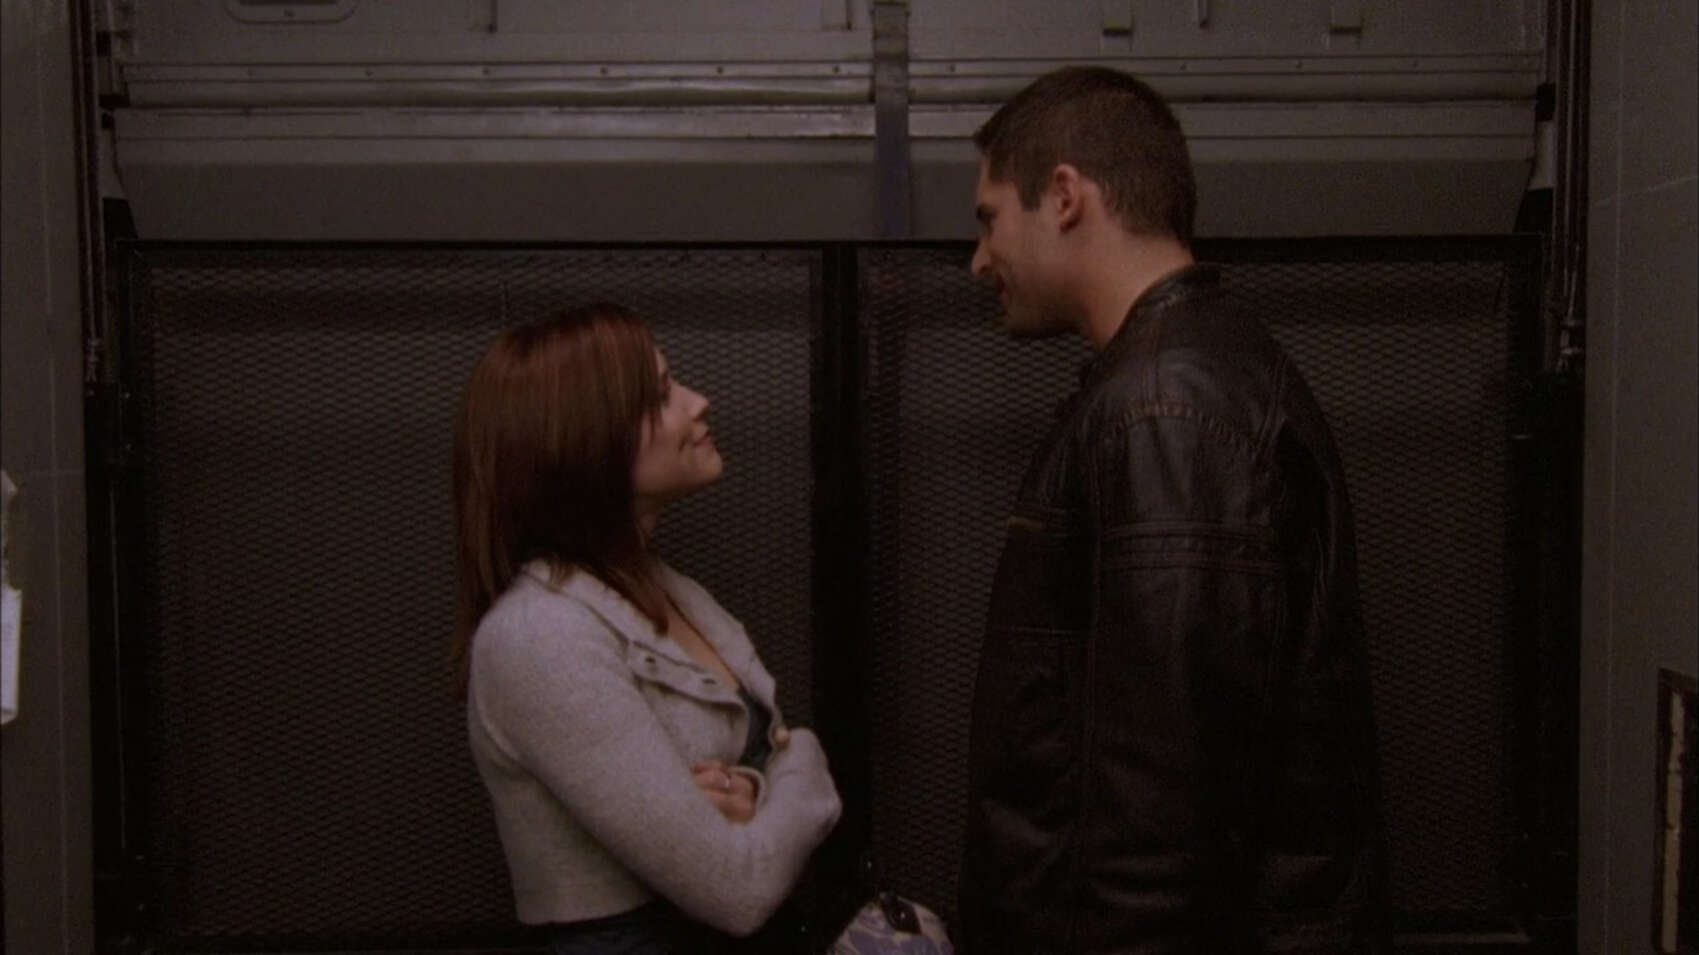 A couple stands close together in an elevator in this image from Tollin/Robbins Productions.